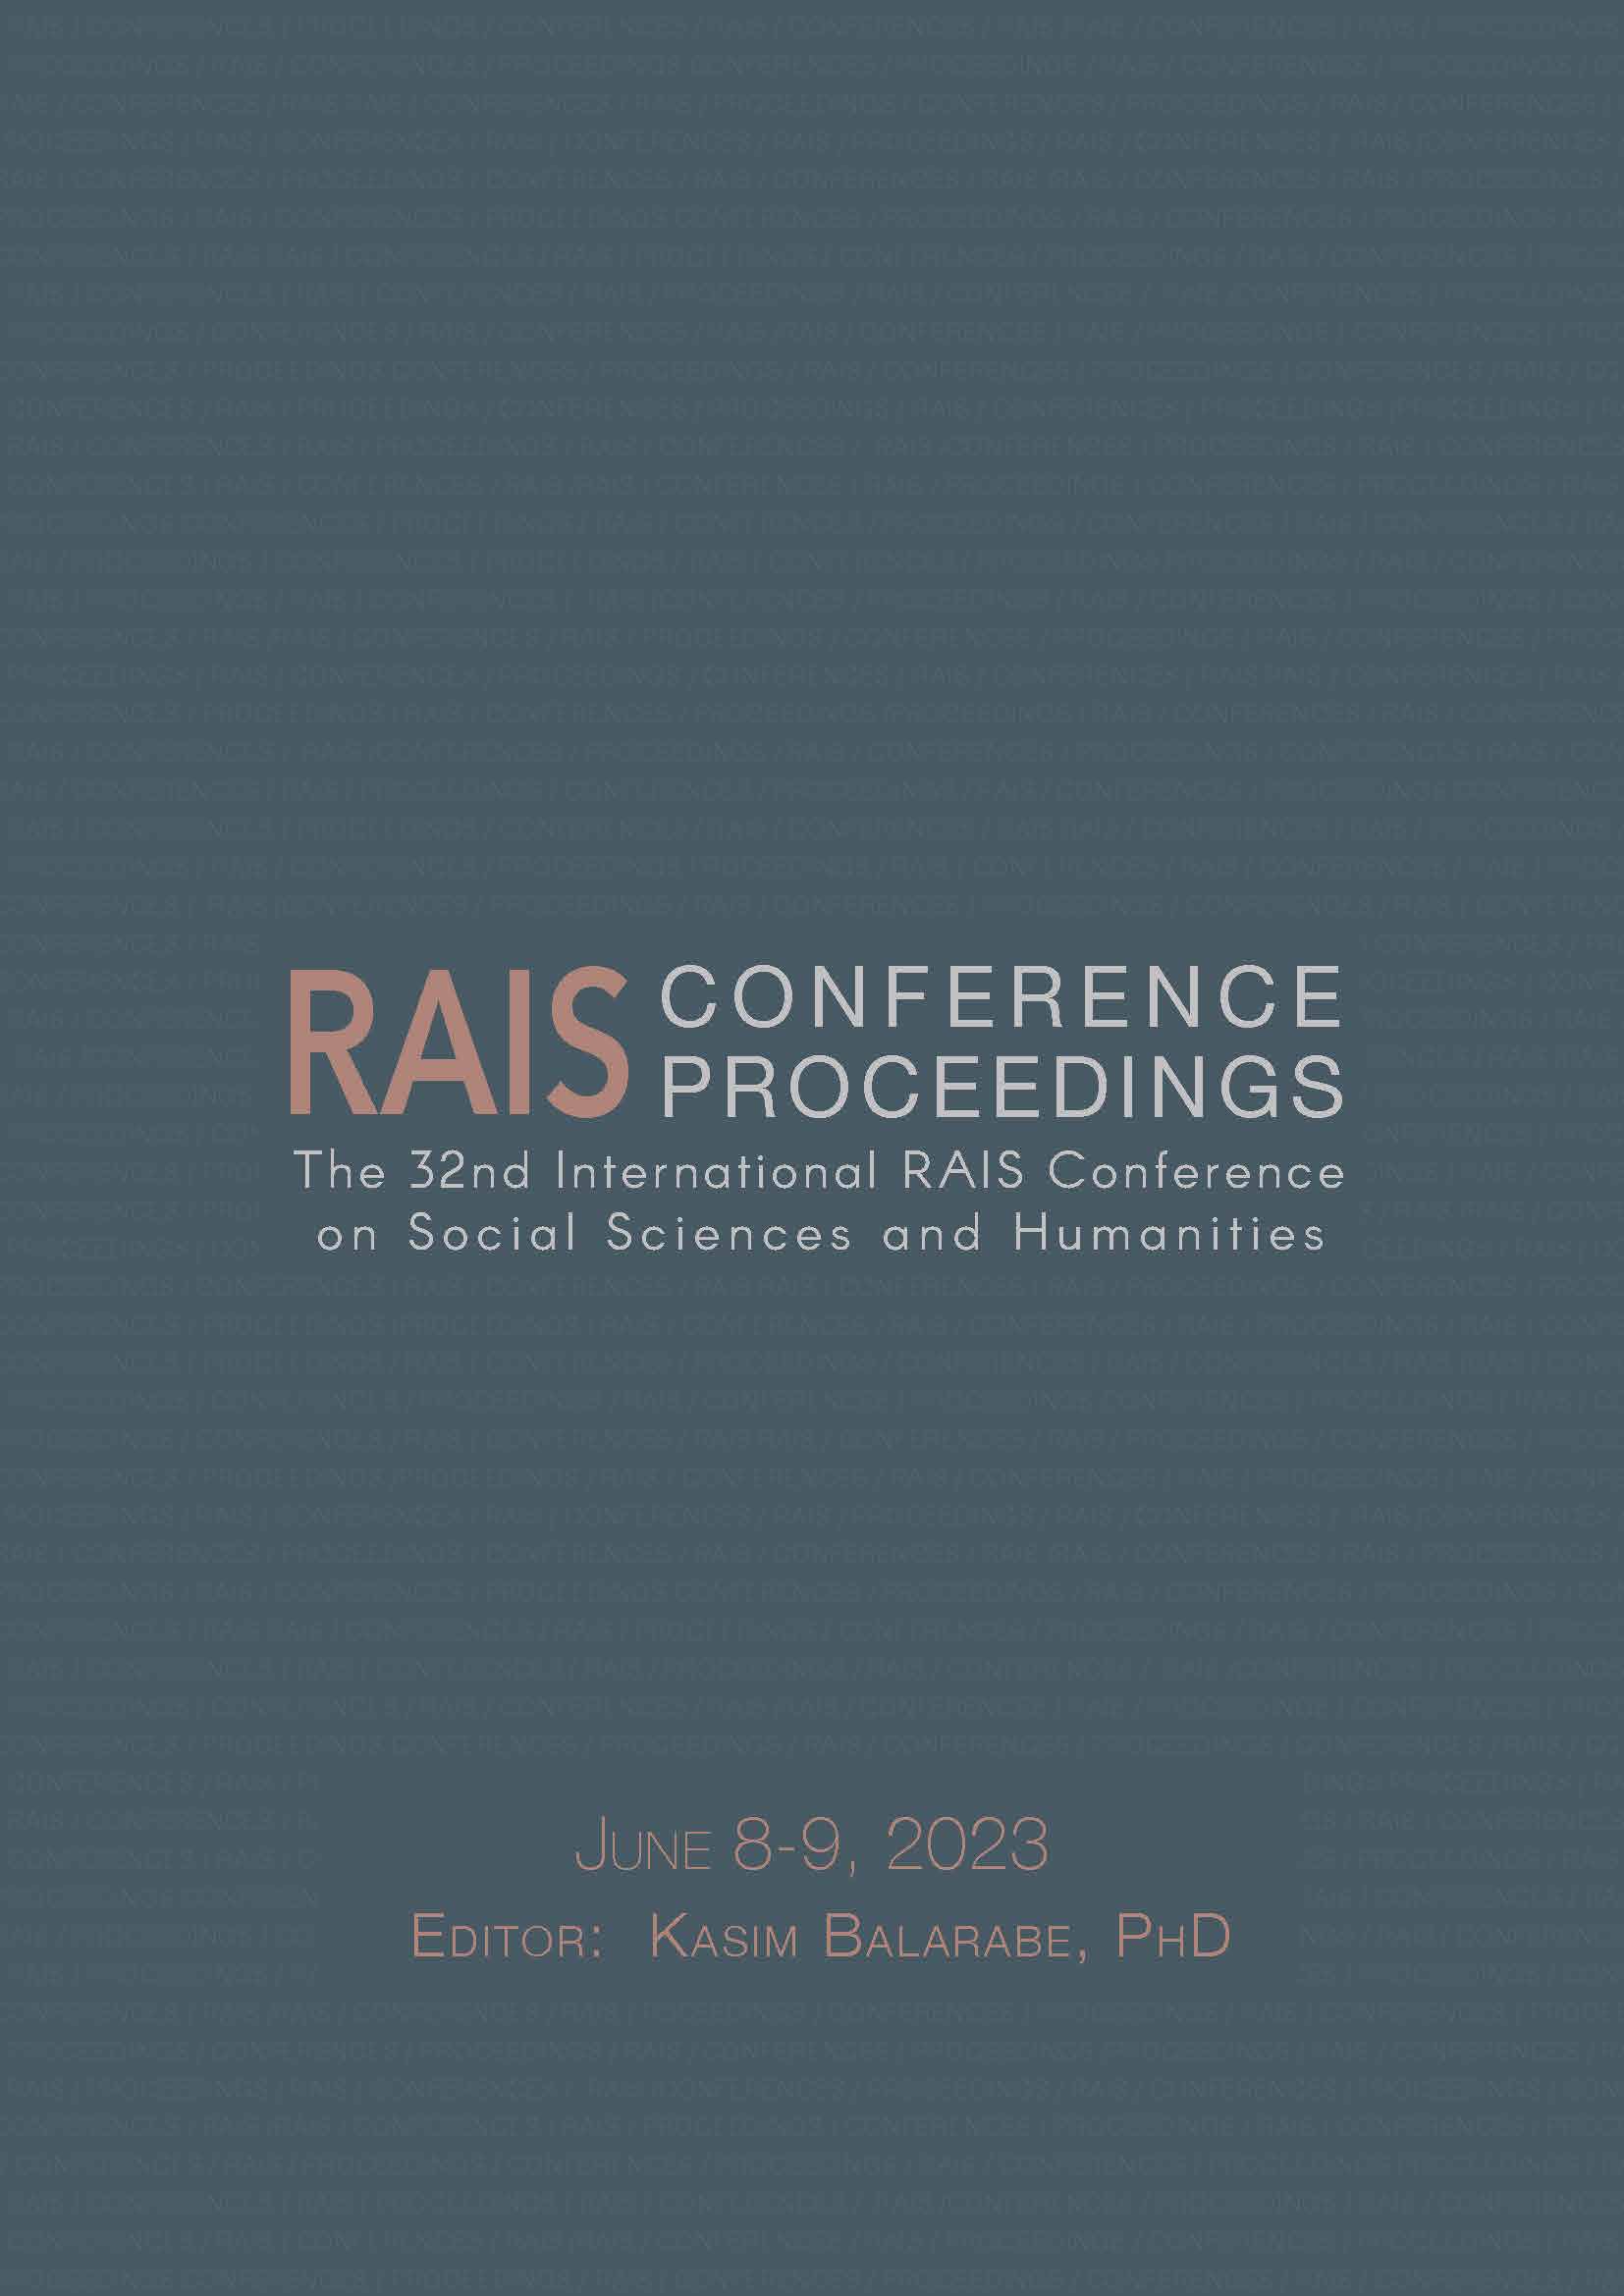 Proceedings of the 32nd International RAIS Conference on Social Sciences and Humanities